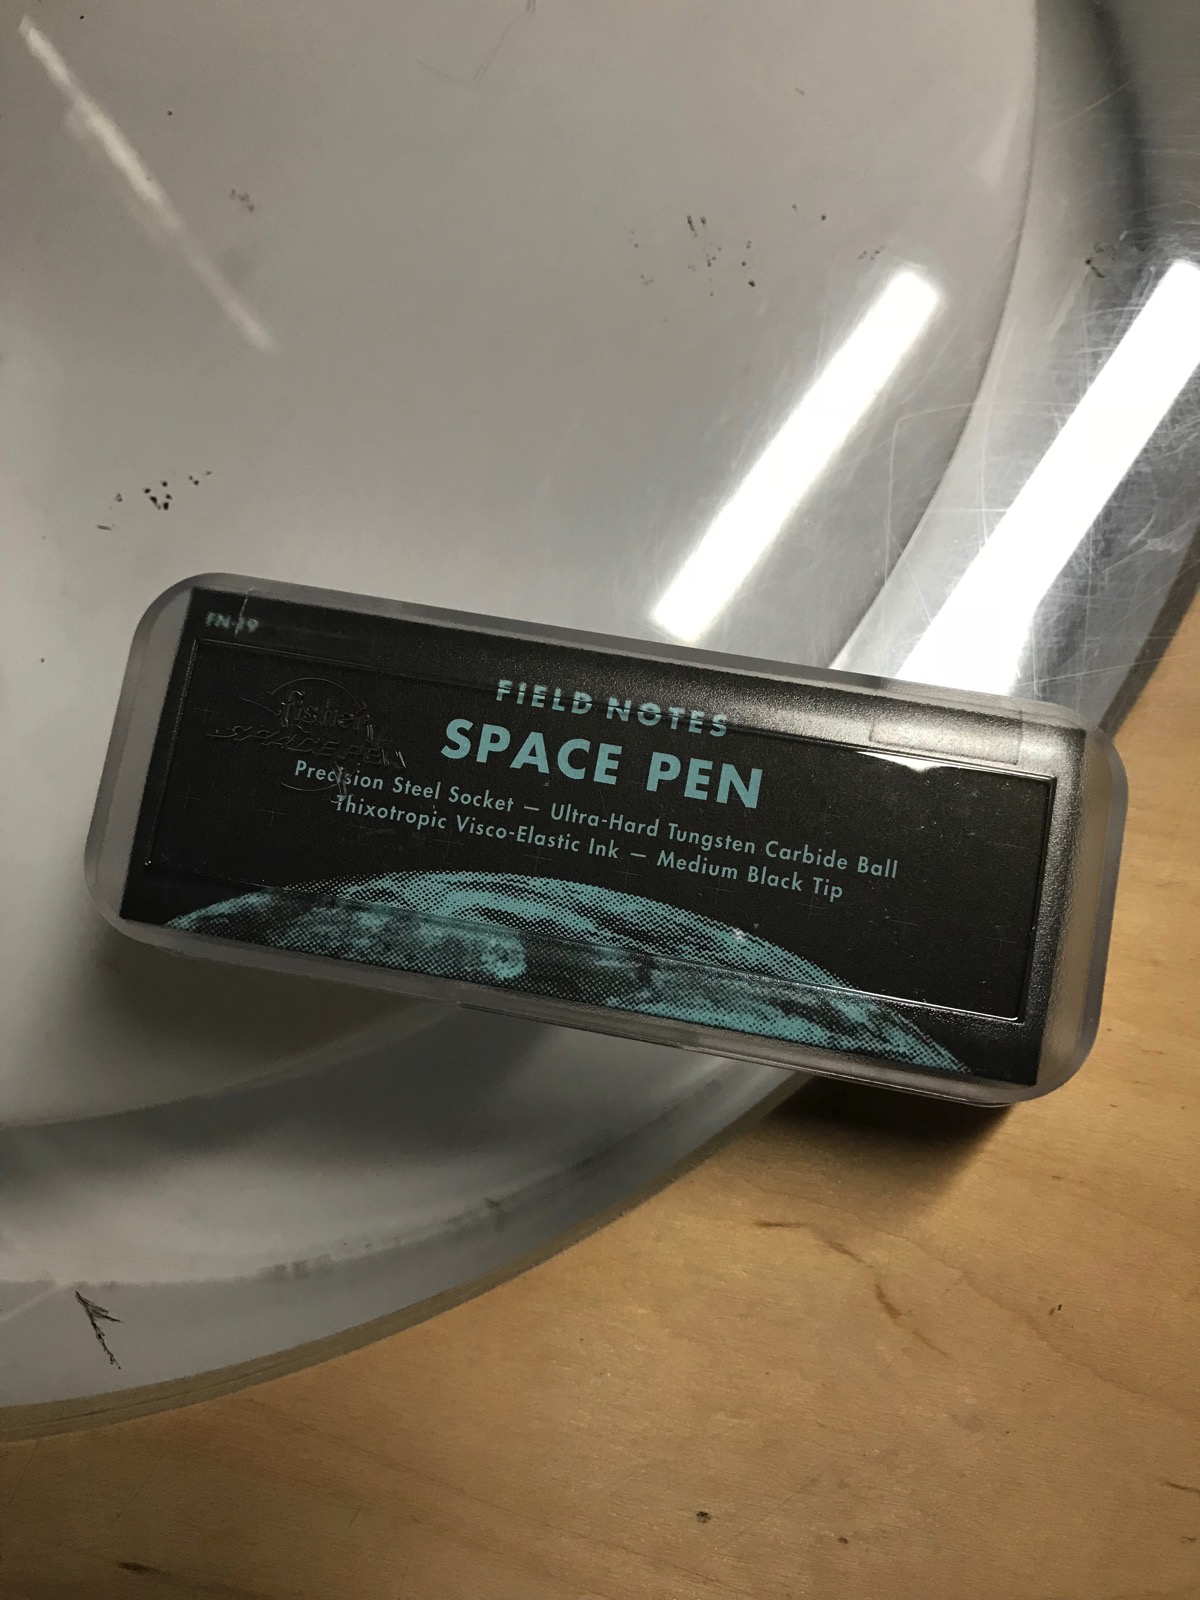 The PC Weenies  Review: Field Notes Fisher Space Pen